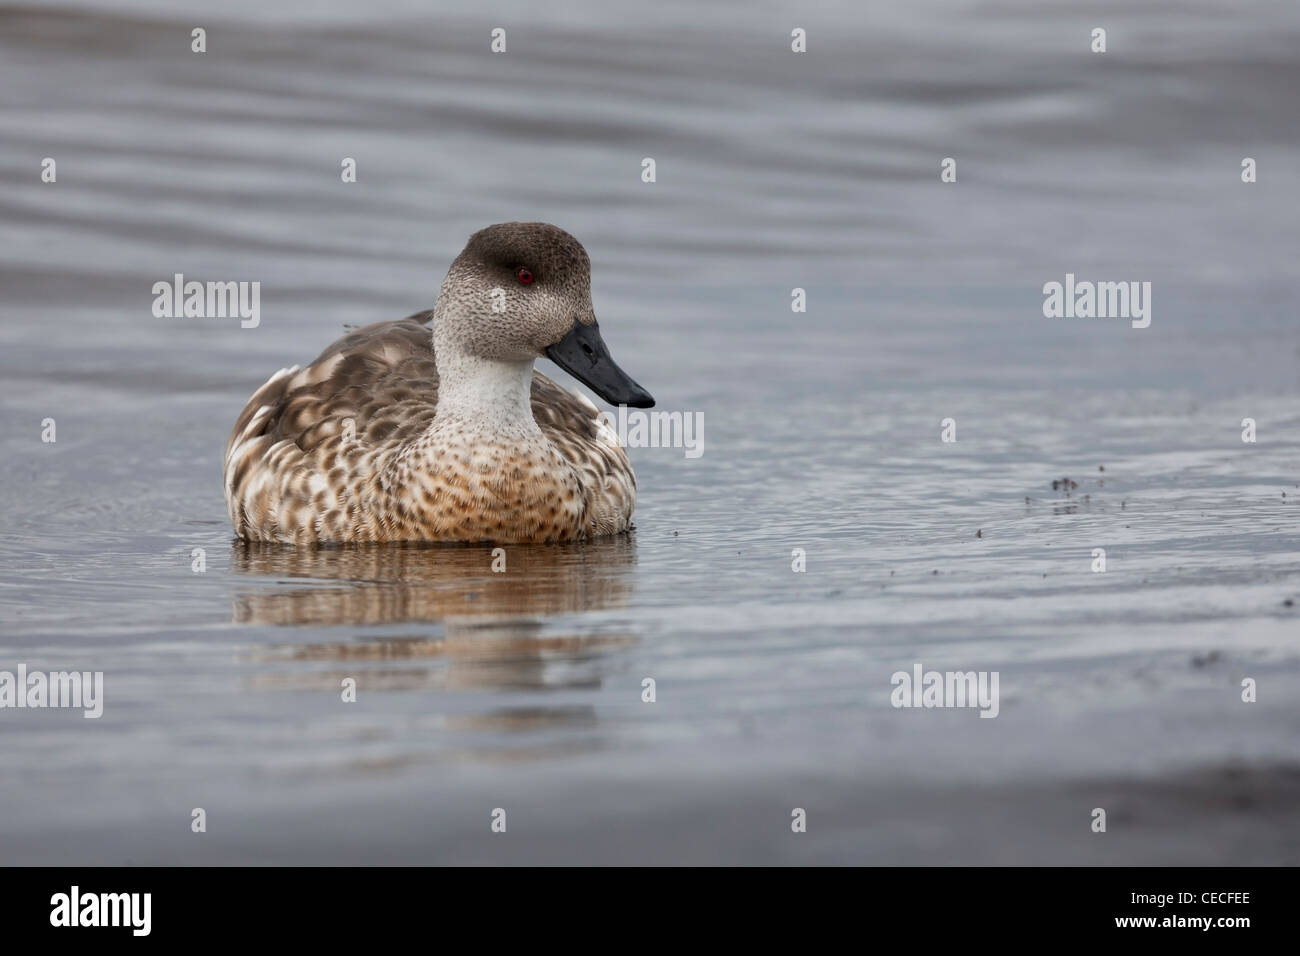 Crested Duck (Lophonetta specularioides specularioides) nuoto in Ushuaia, Tierra del Fuego, Argentina Foto Stock